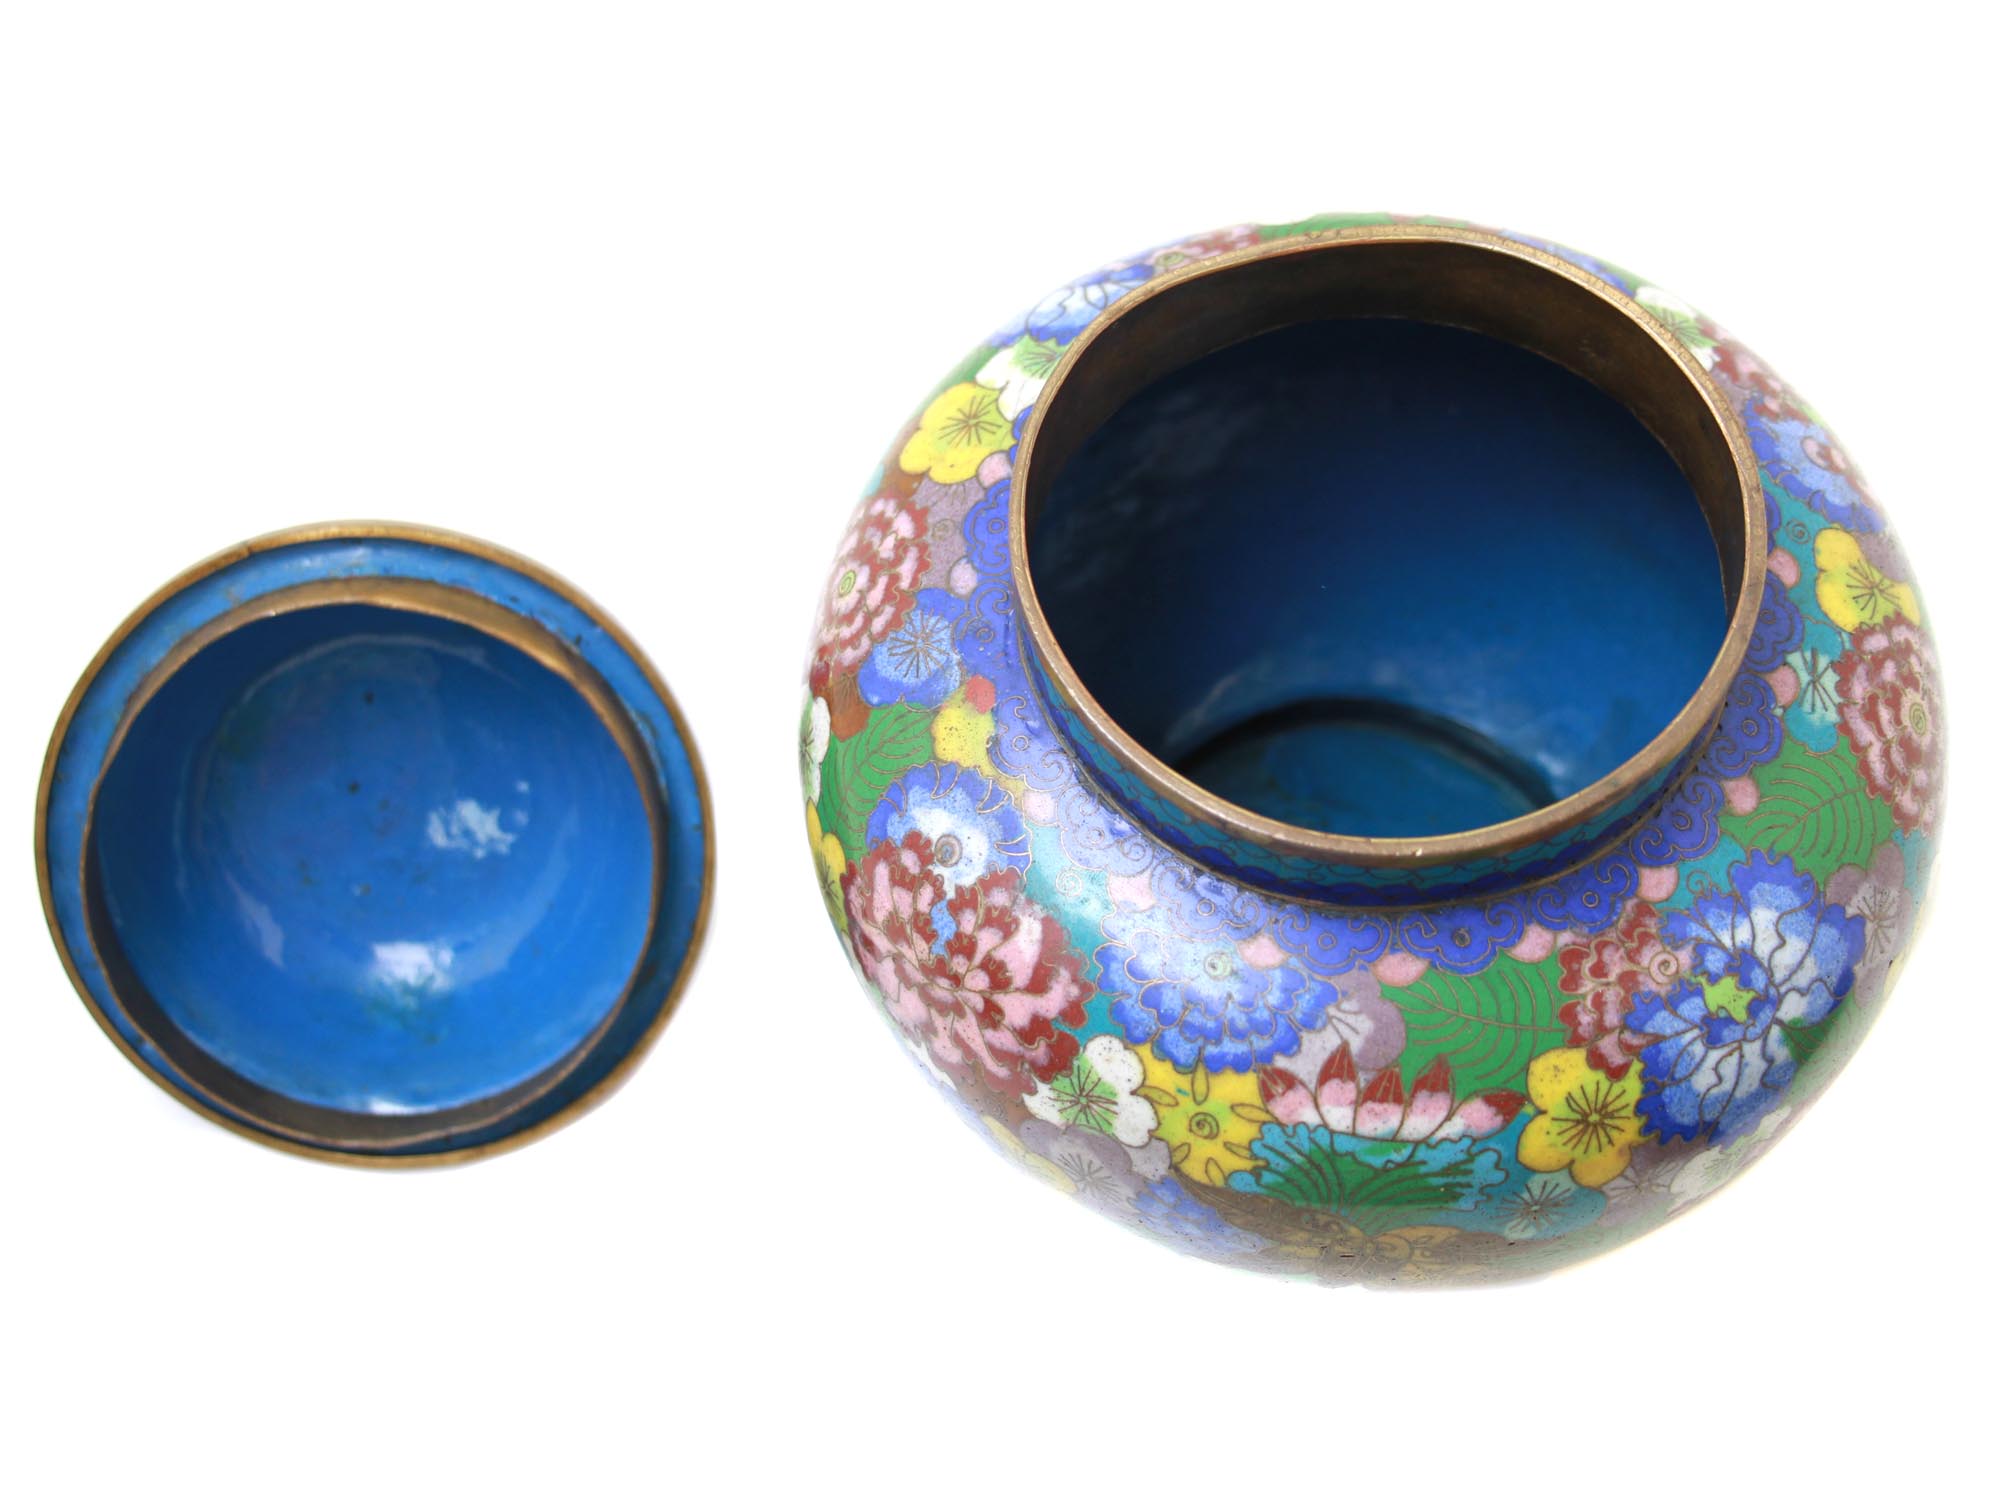 A CLASSIC CHINESE CLOISONNE ENAMEL LIDDID VASE PIC-2